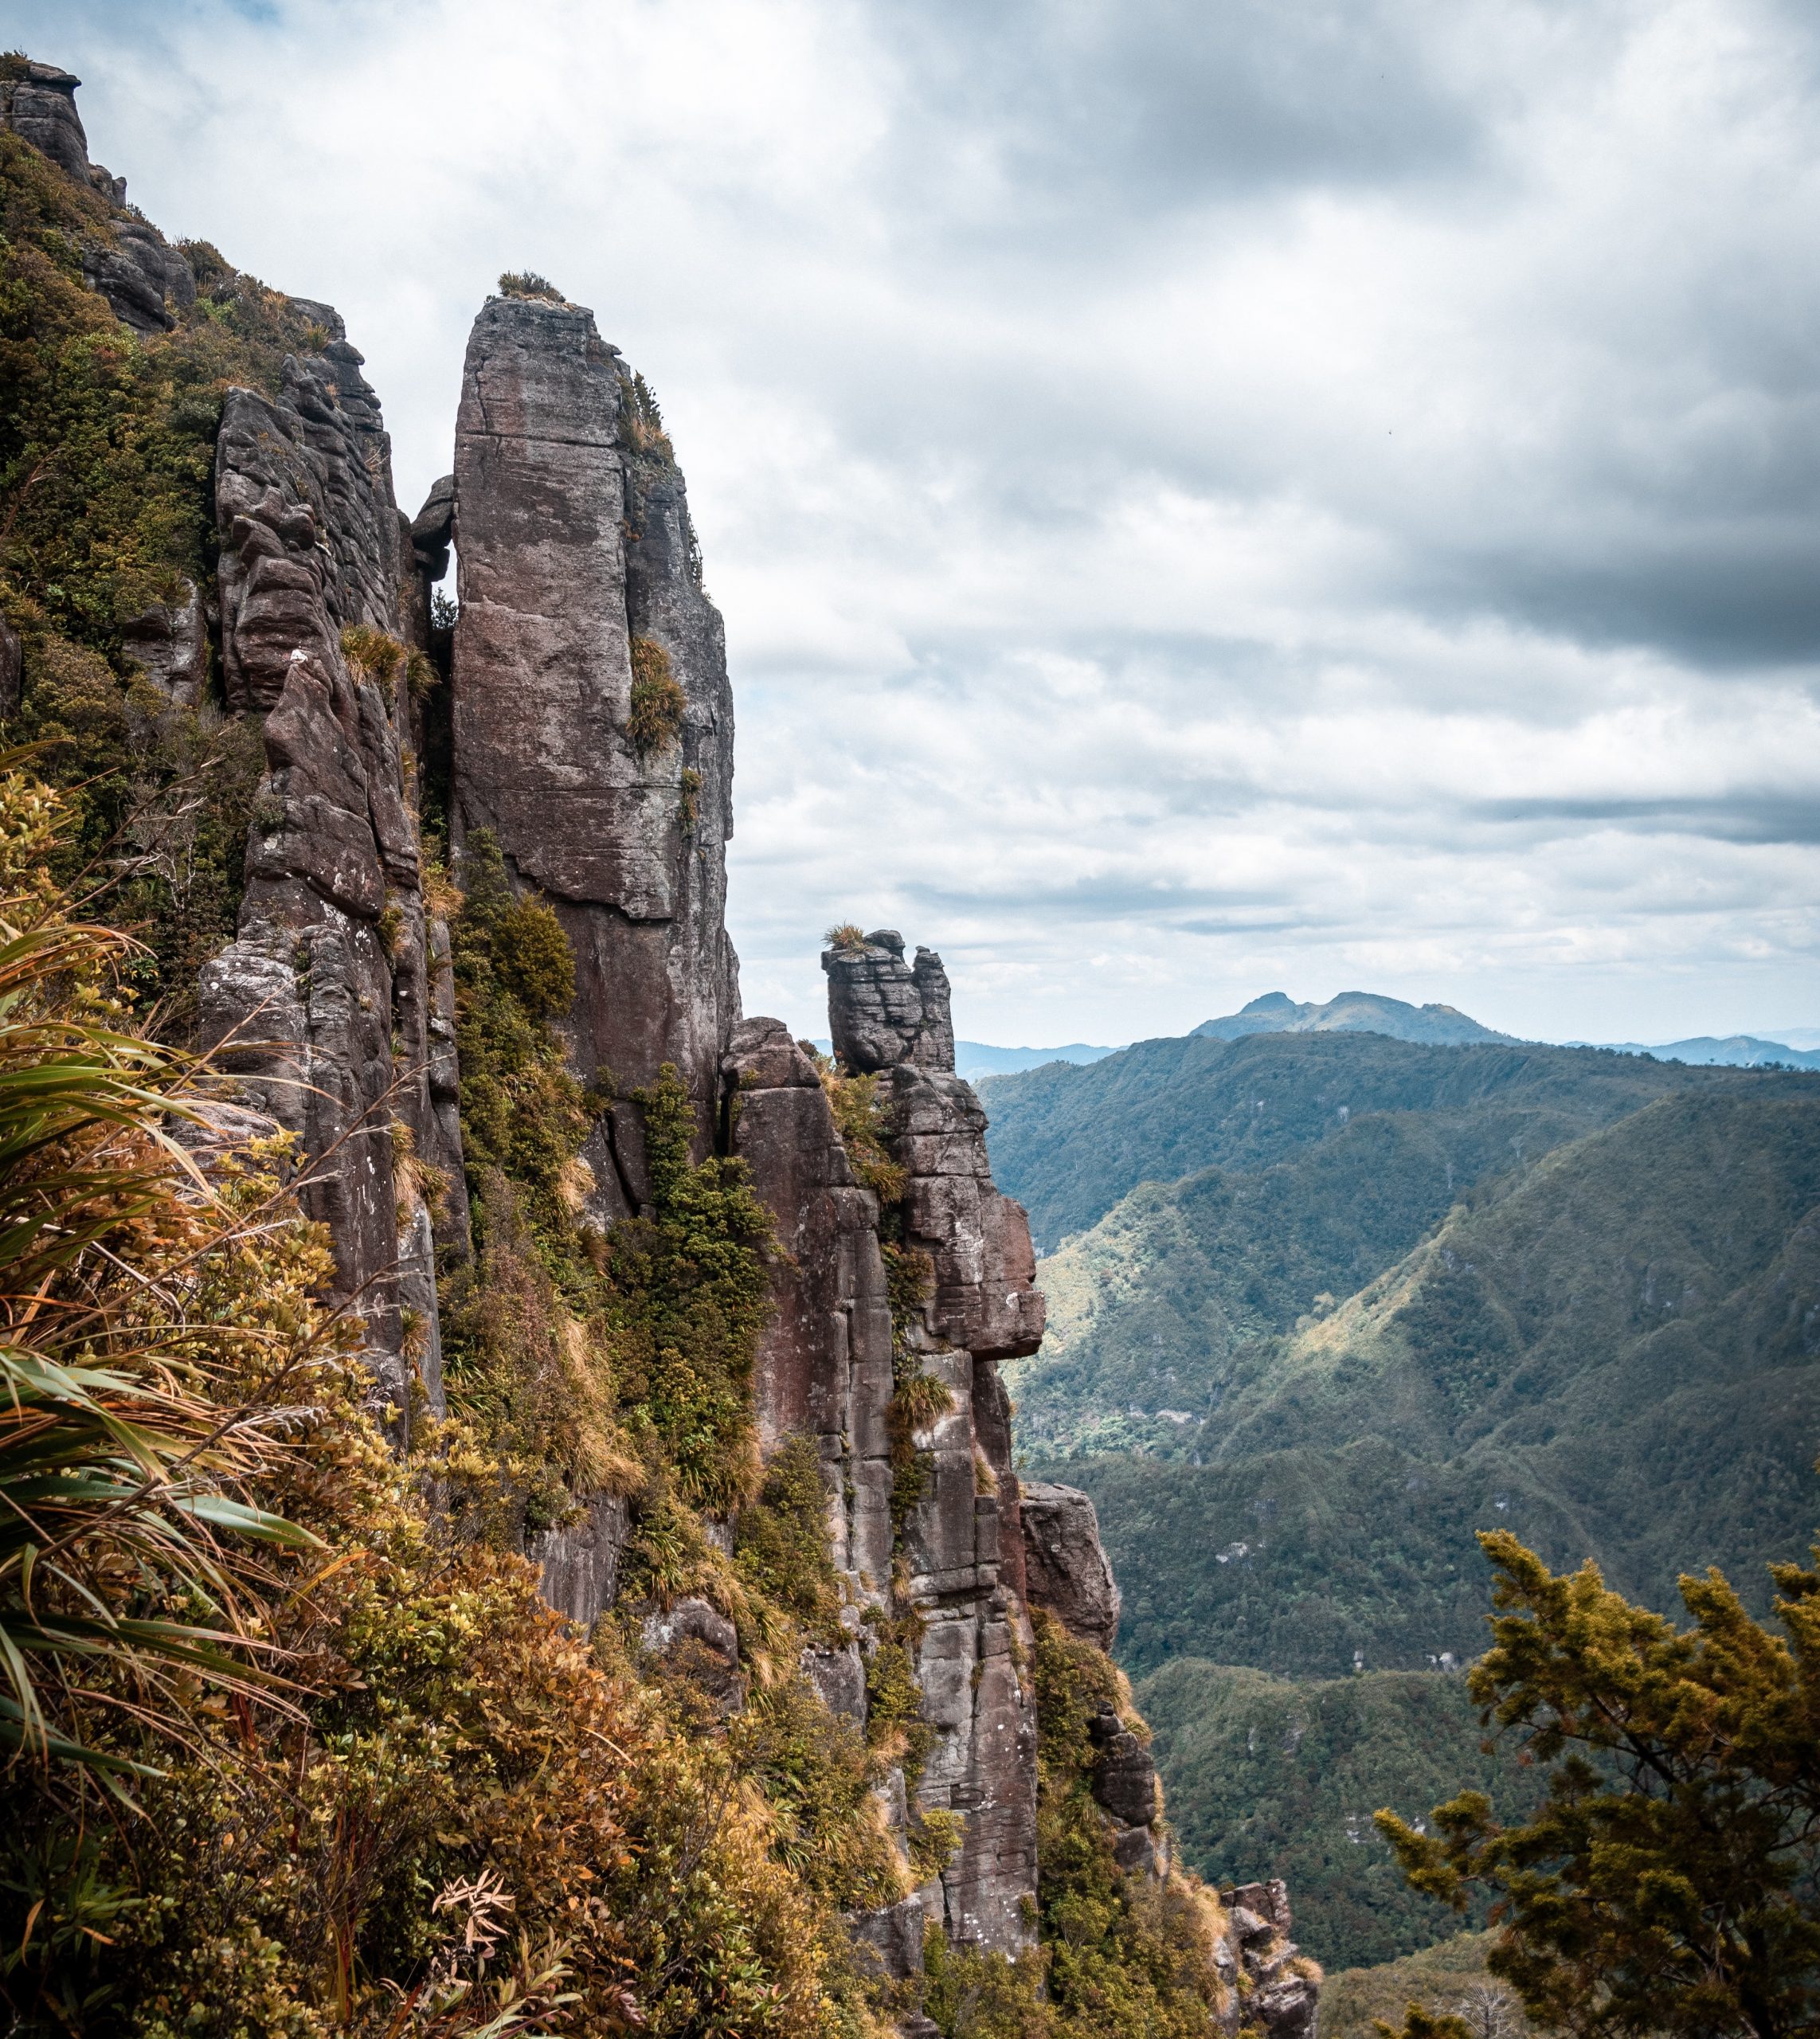 A steep cliff face with pinnacle rocks overlooking grassy mountains and cloudy skies.